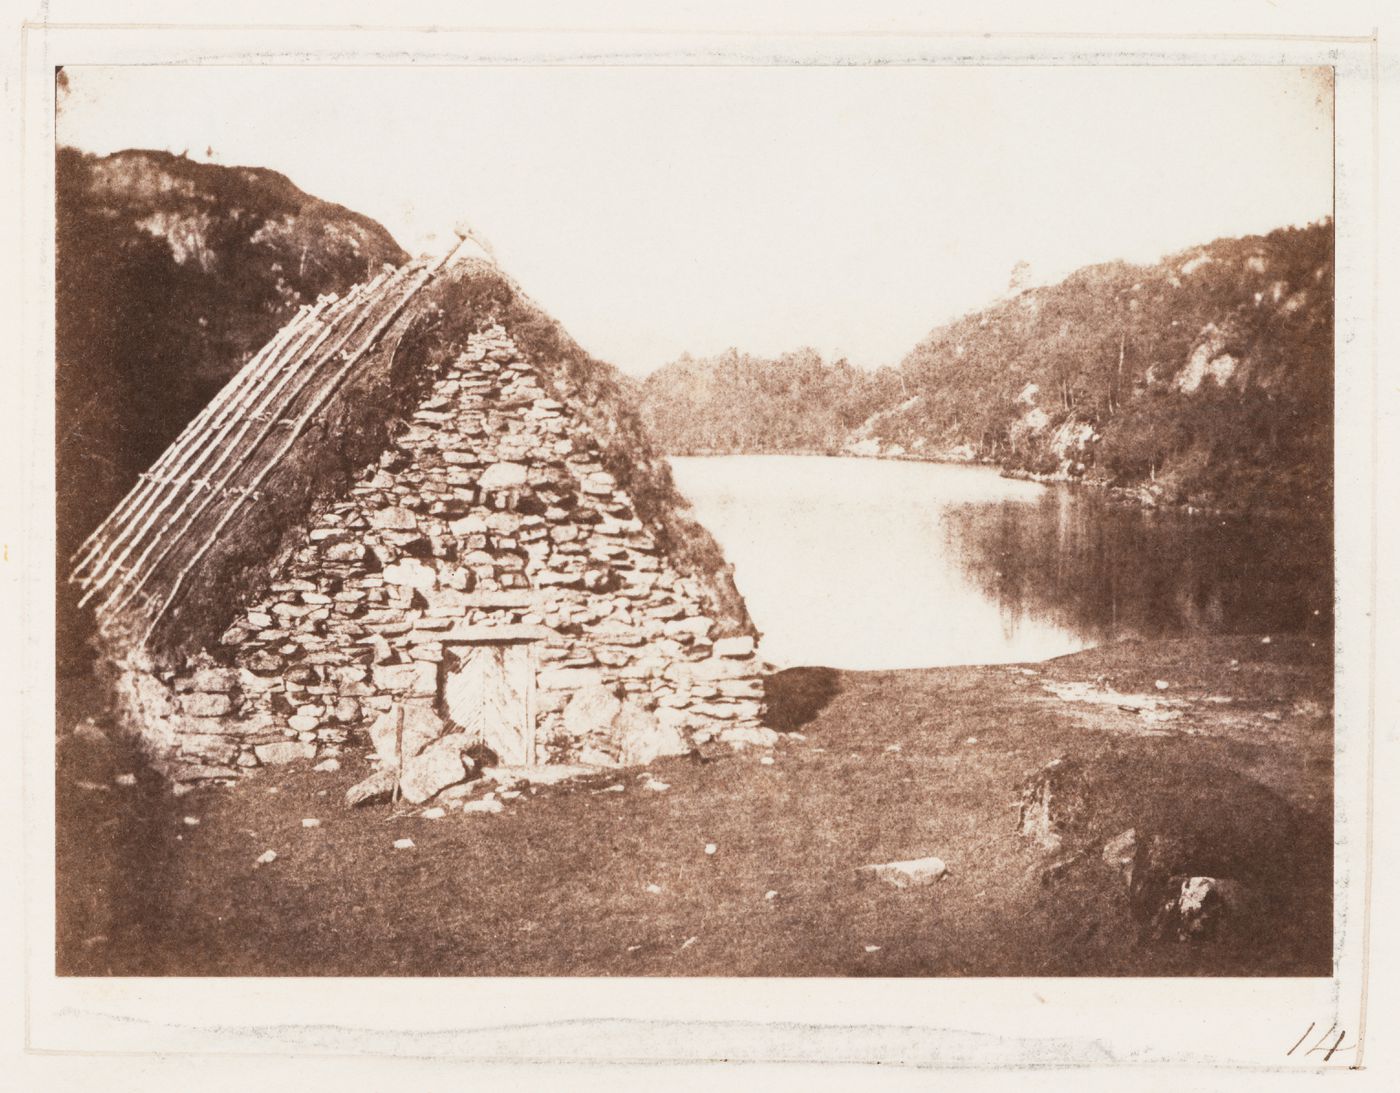 View of Highland hut with thatched roof, dry-stacked walls, and wooden door on the banks of Loch Katrine, Scotland